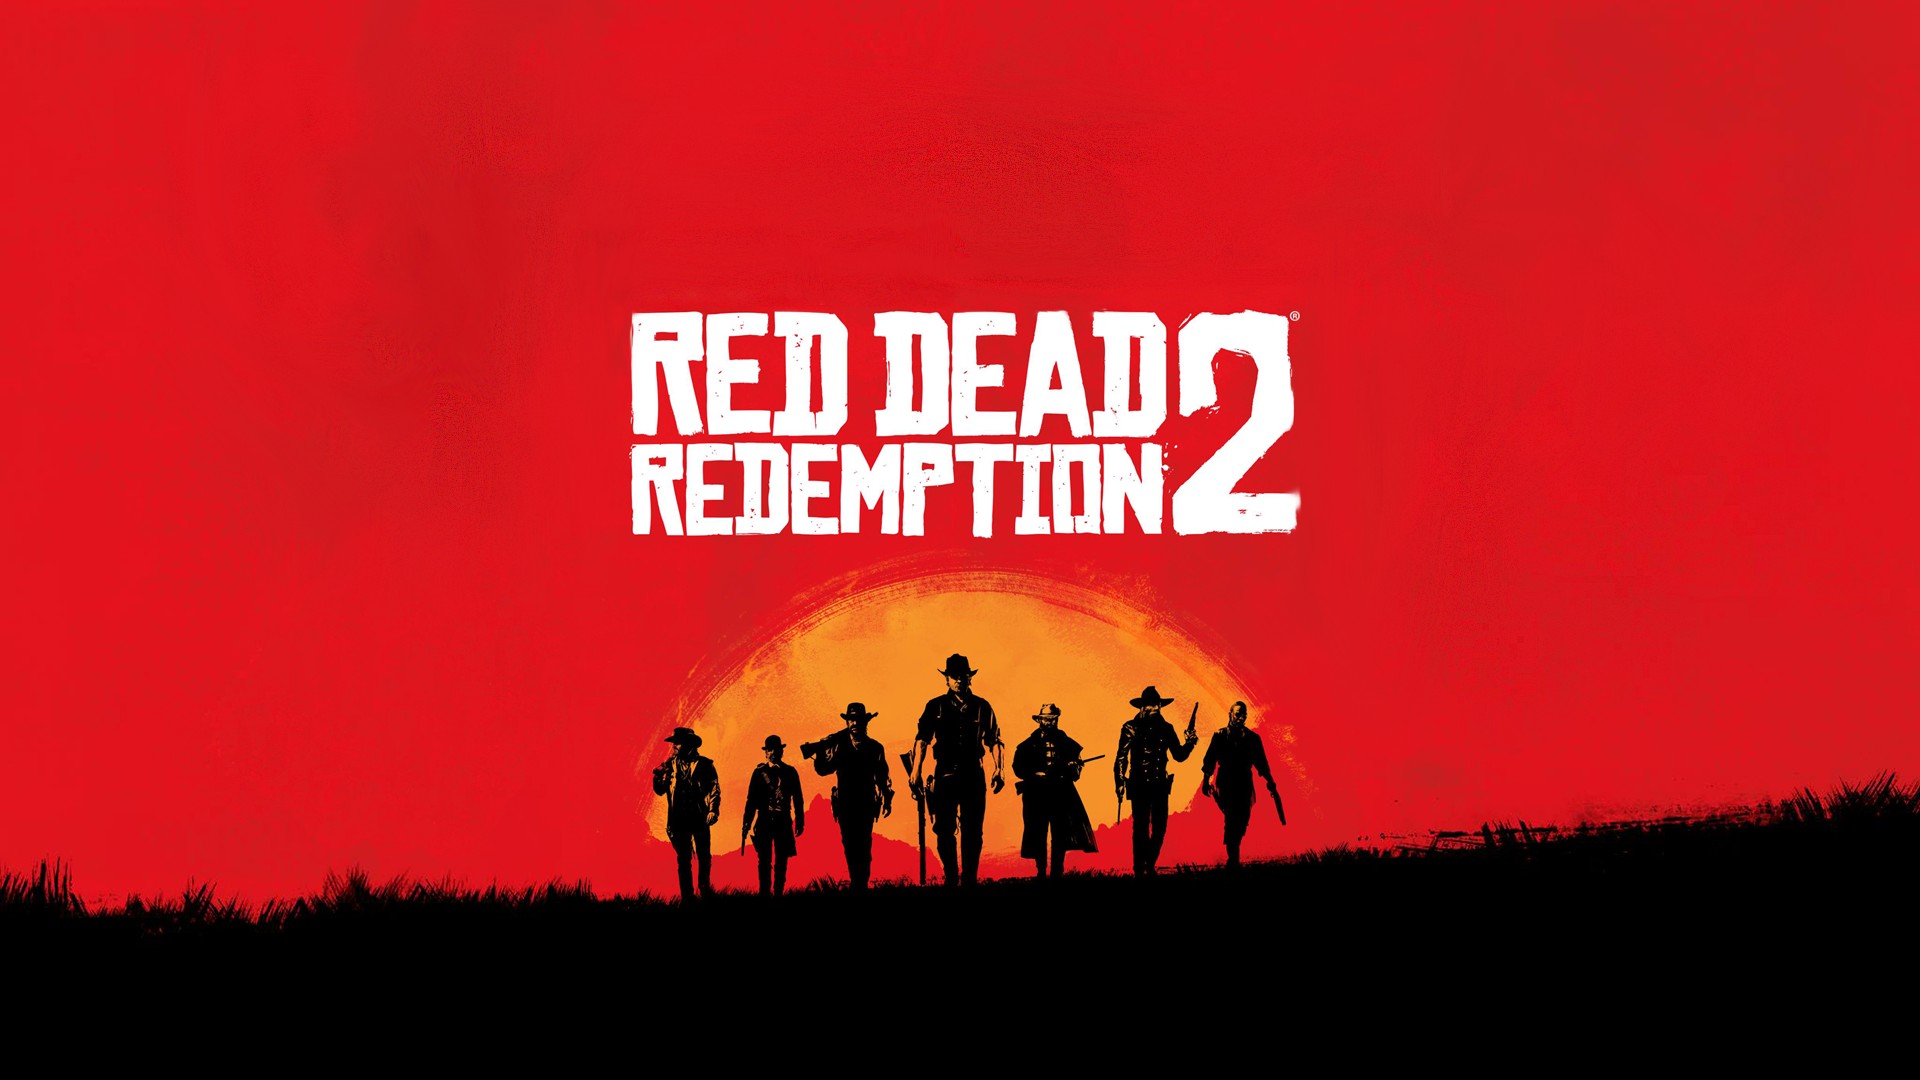 gamers, Video games, Red Dead Redemption, Red Dead Redemption 2, Rockstar Games, Gamer, Red, Western Wallpaper